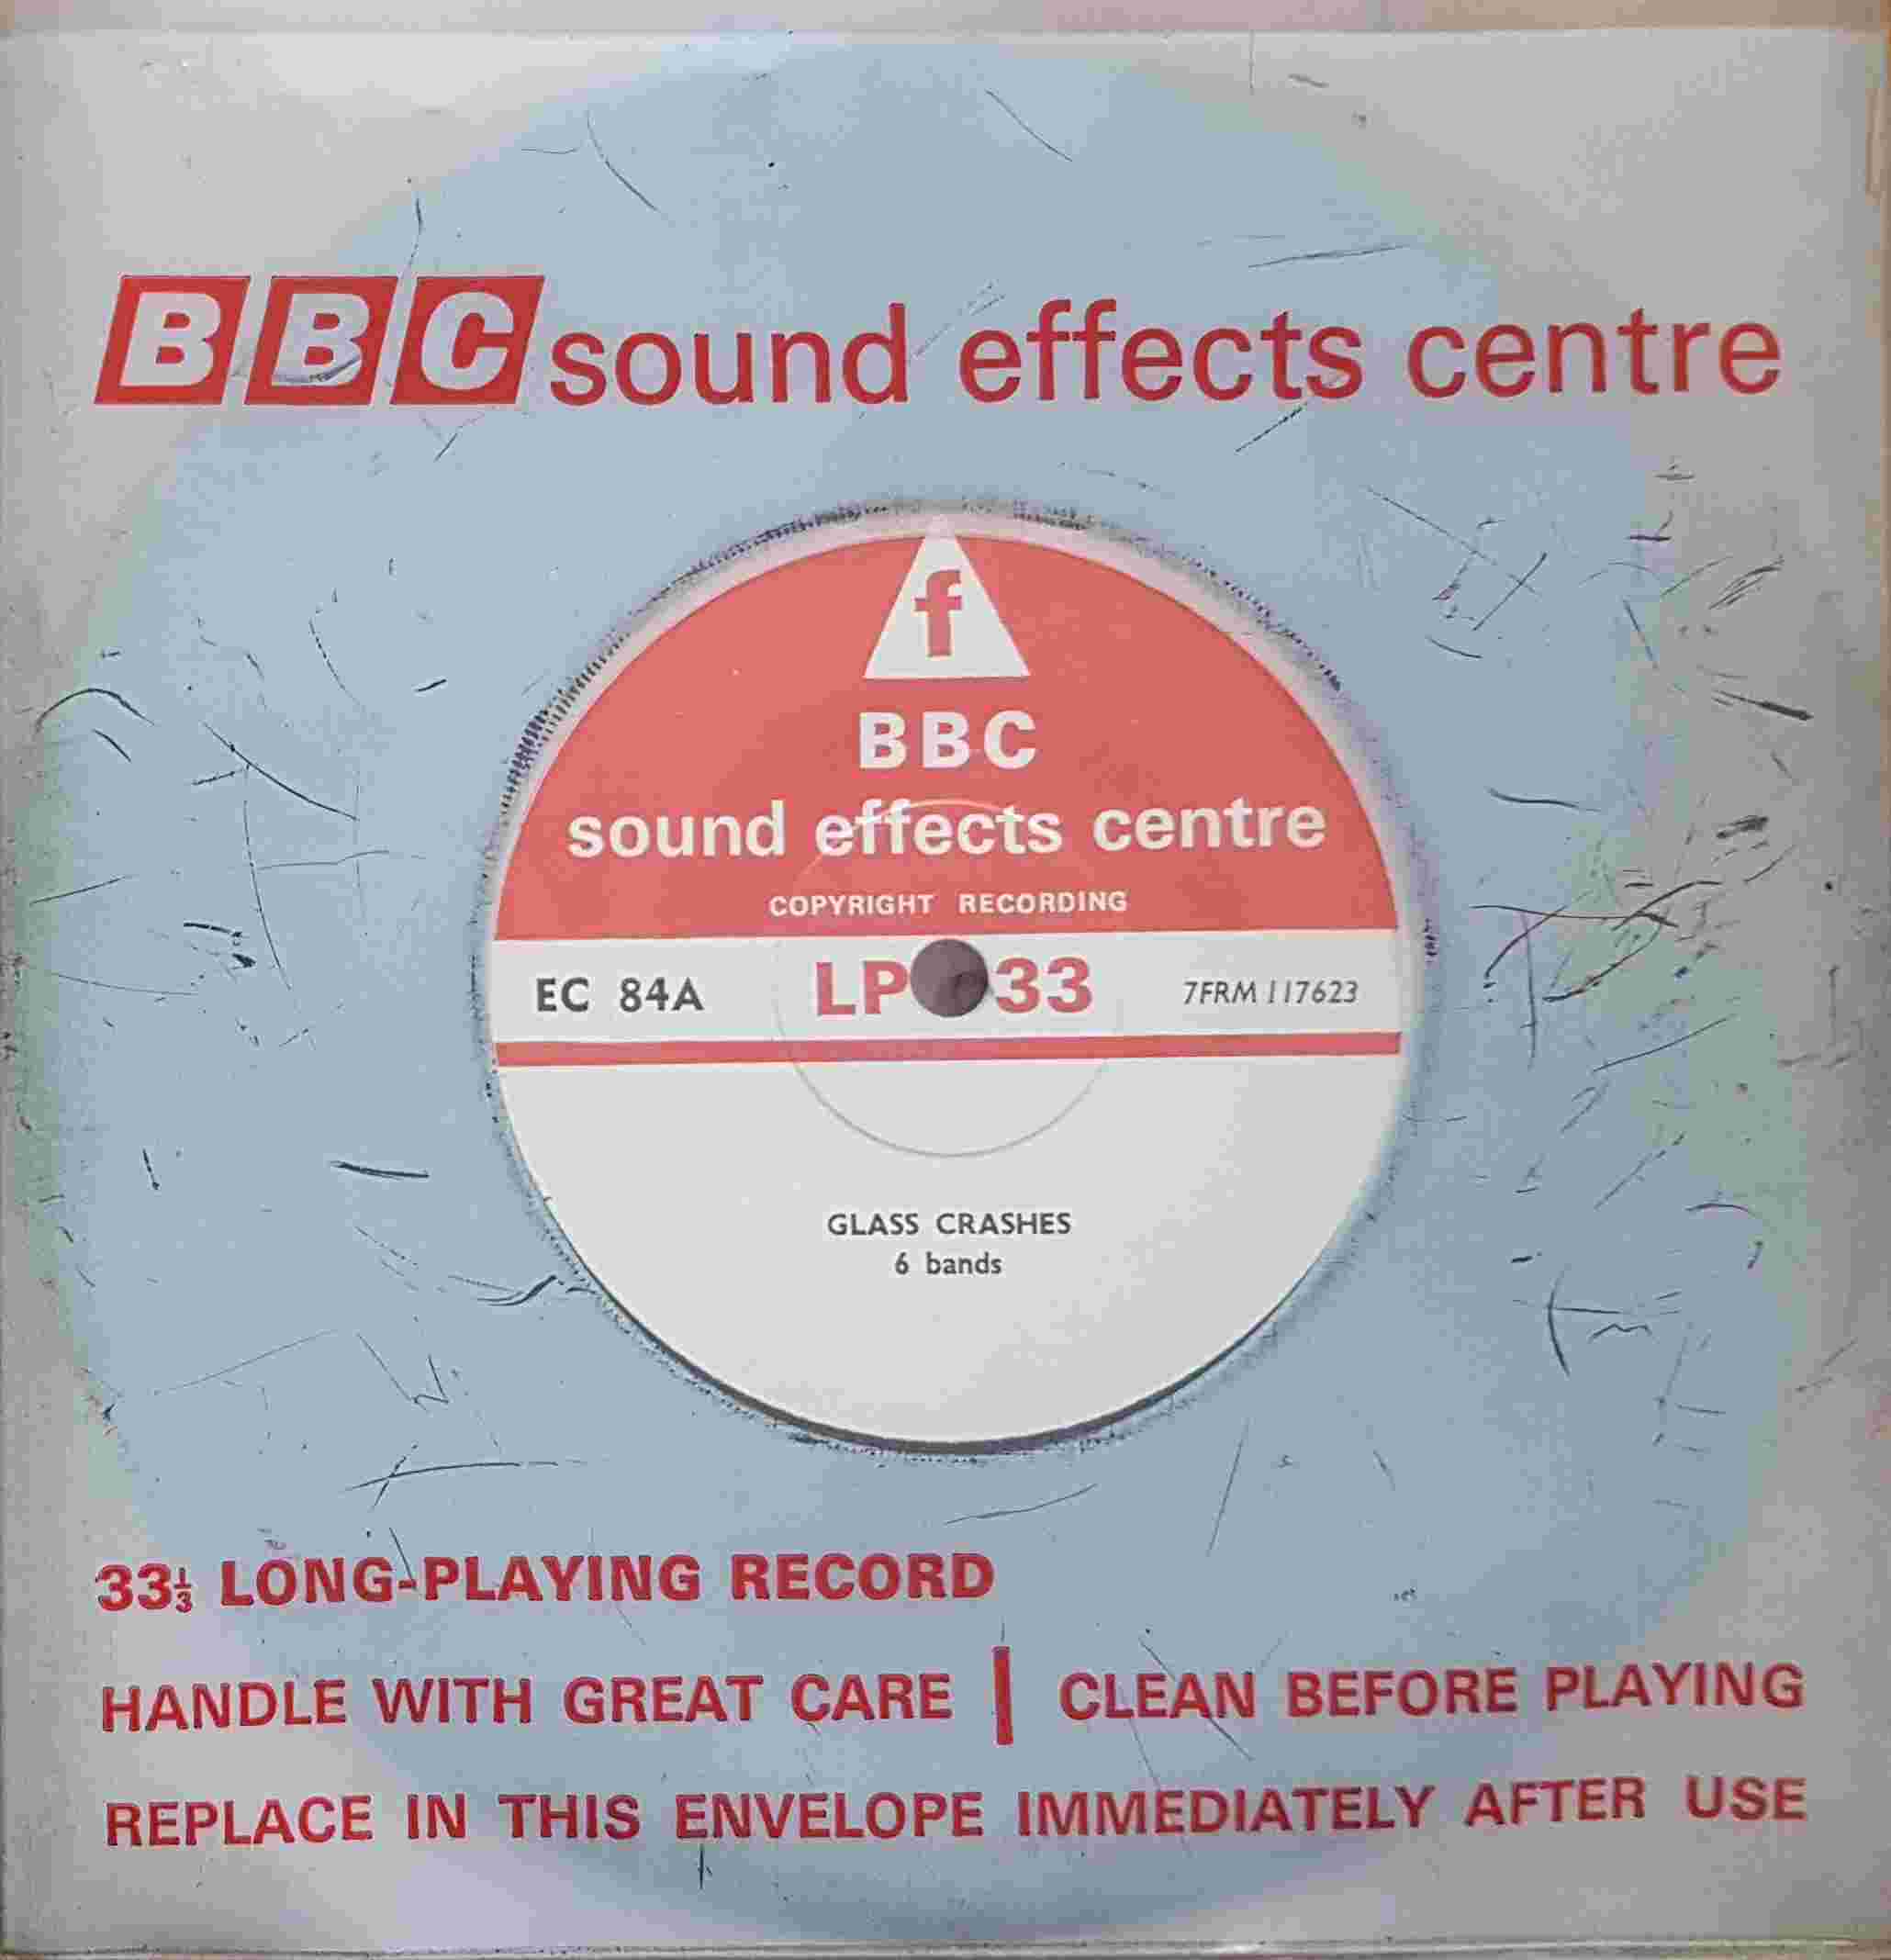 Picture of EC 84A Glass crashes by artist Not registered from the BBC records and Tapes library